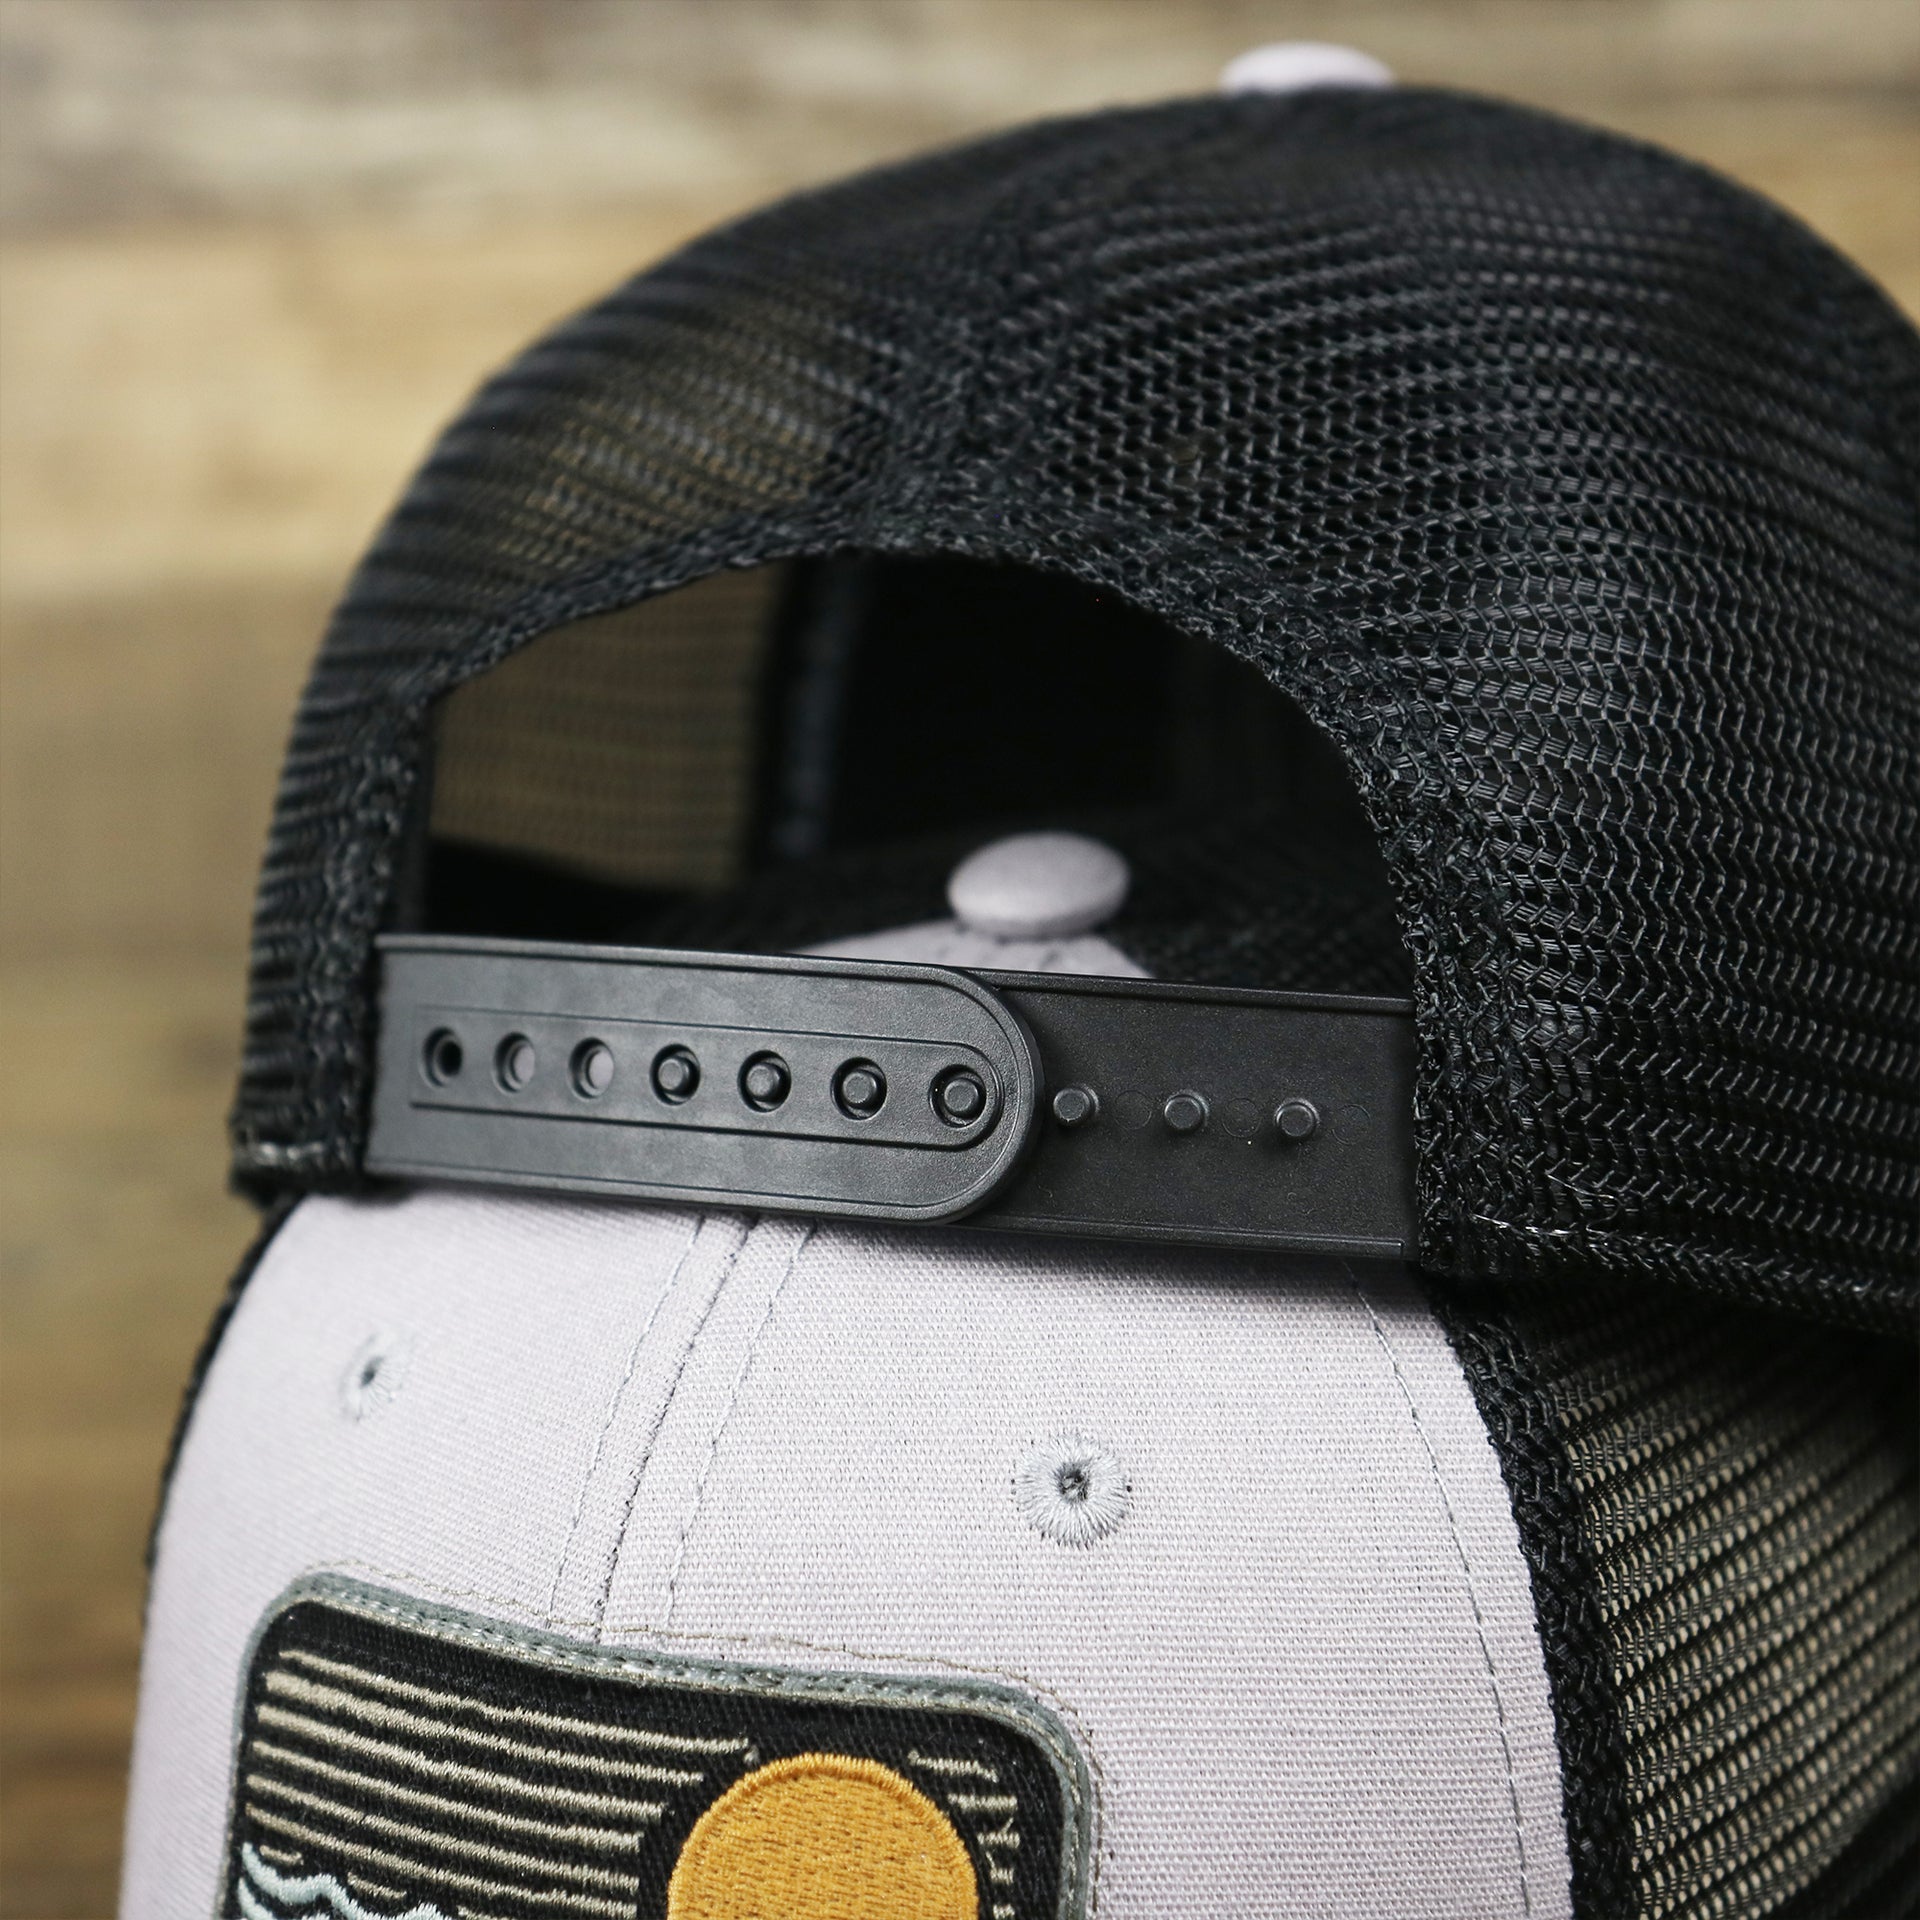 The Black Adjustable Strap on the Youth New Jersey Ocean City Sunset Mesh Back Trucker Hat | Gray And Black Mesh Youth Trucker Hat